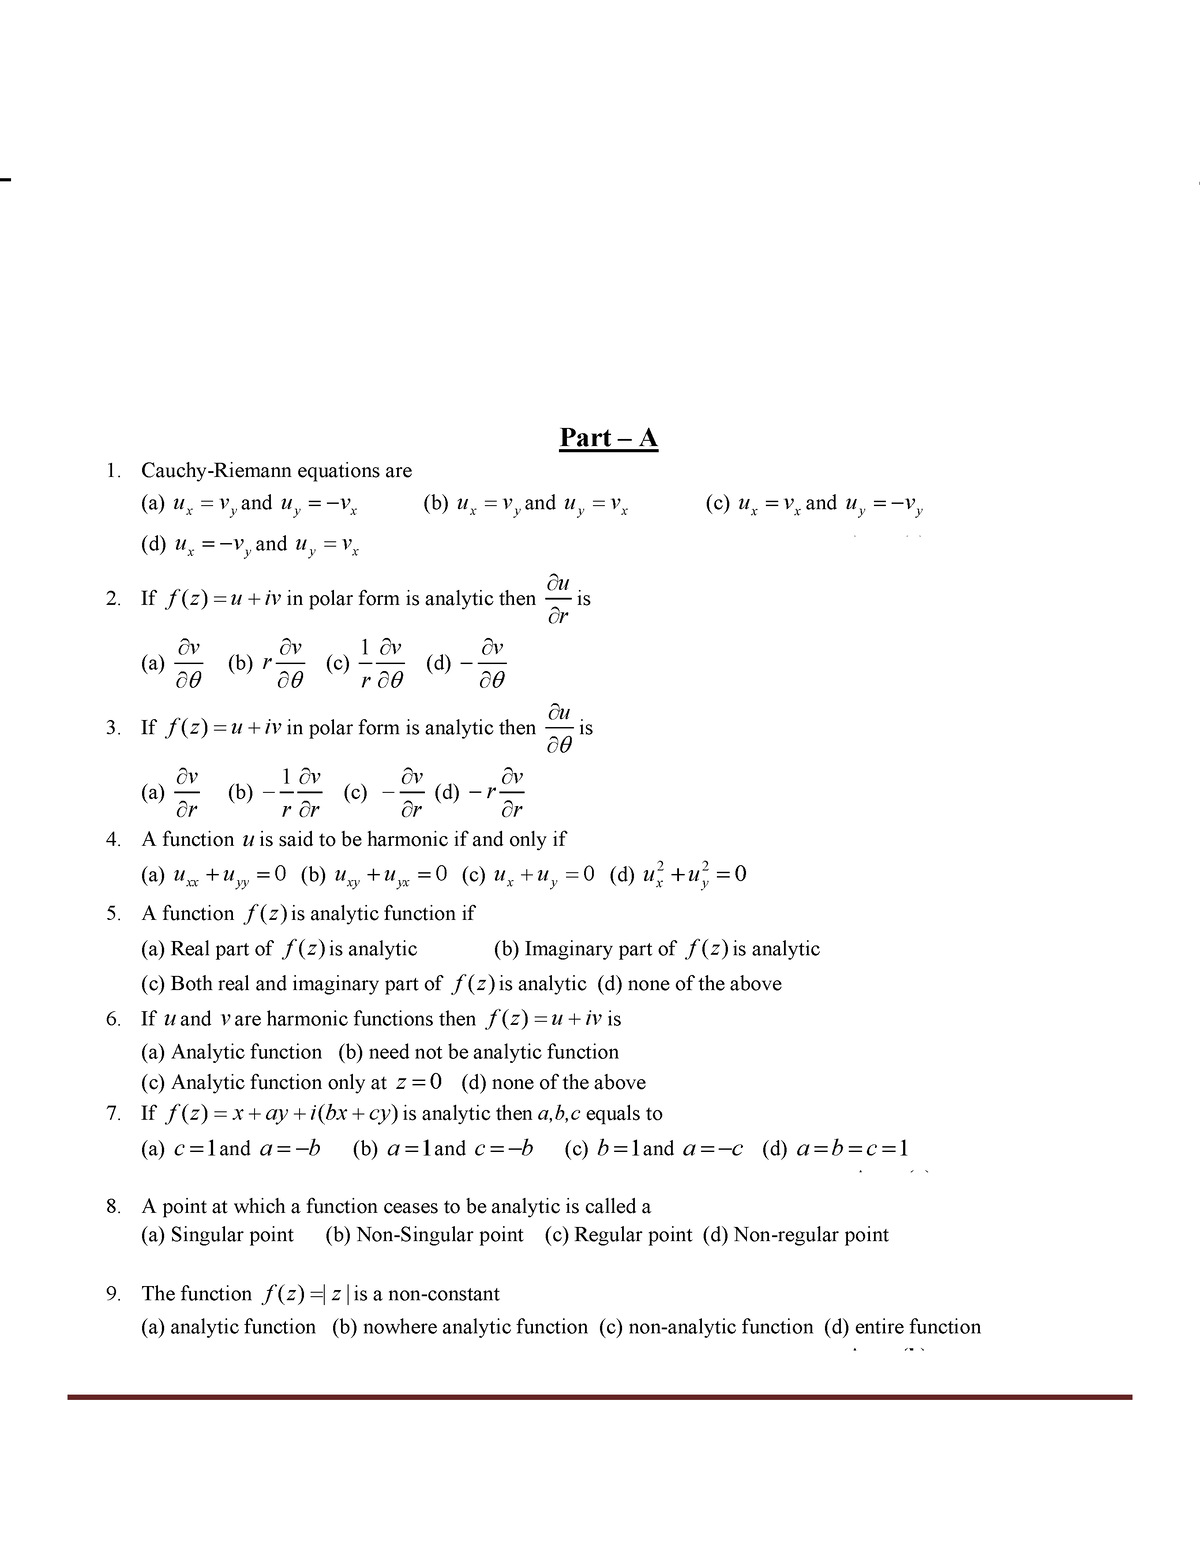 the assignment problem mcq